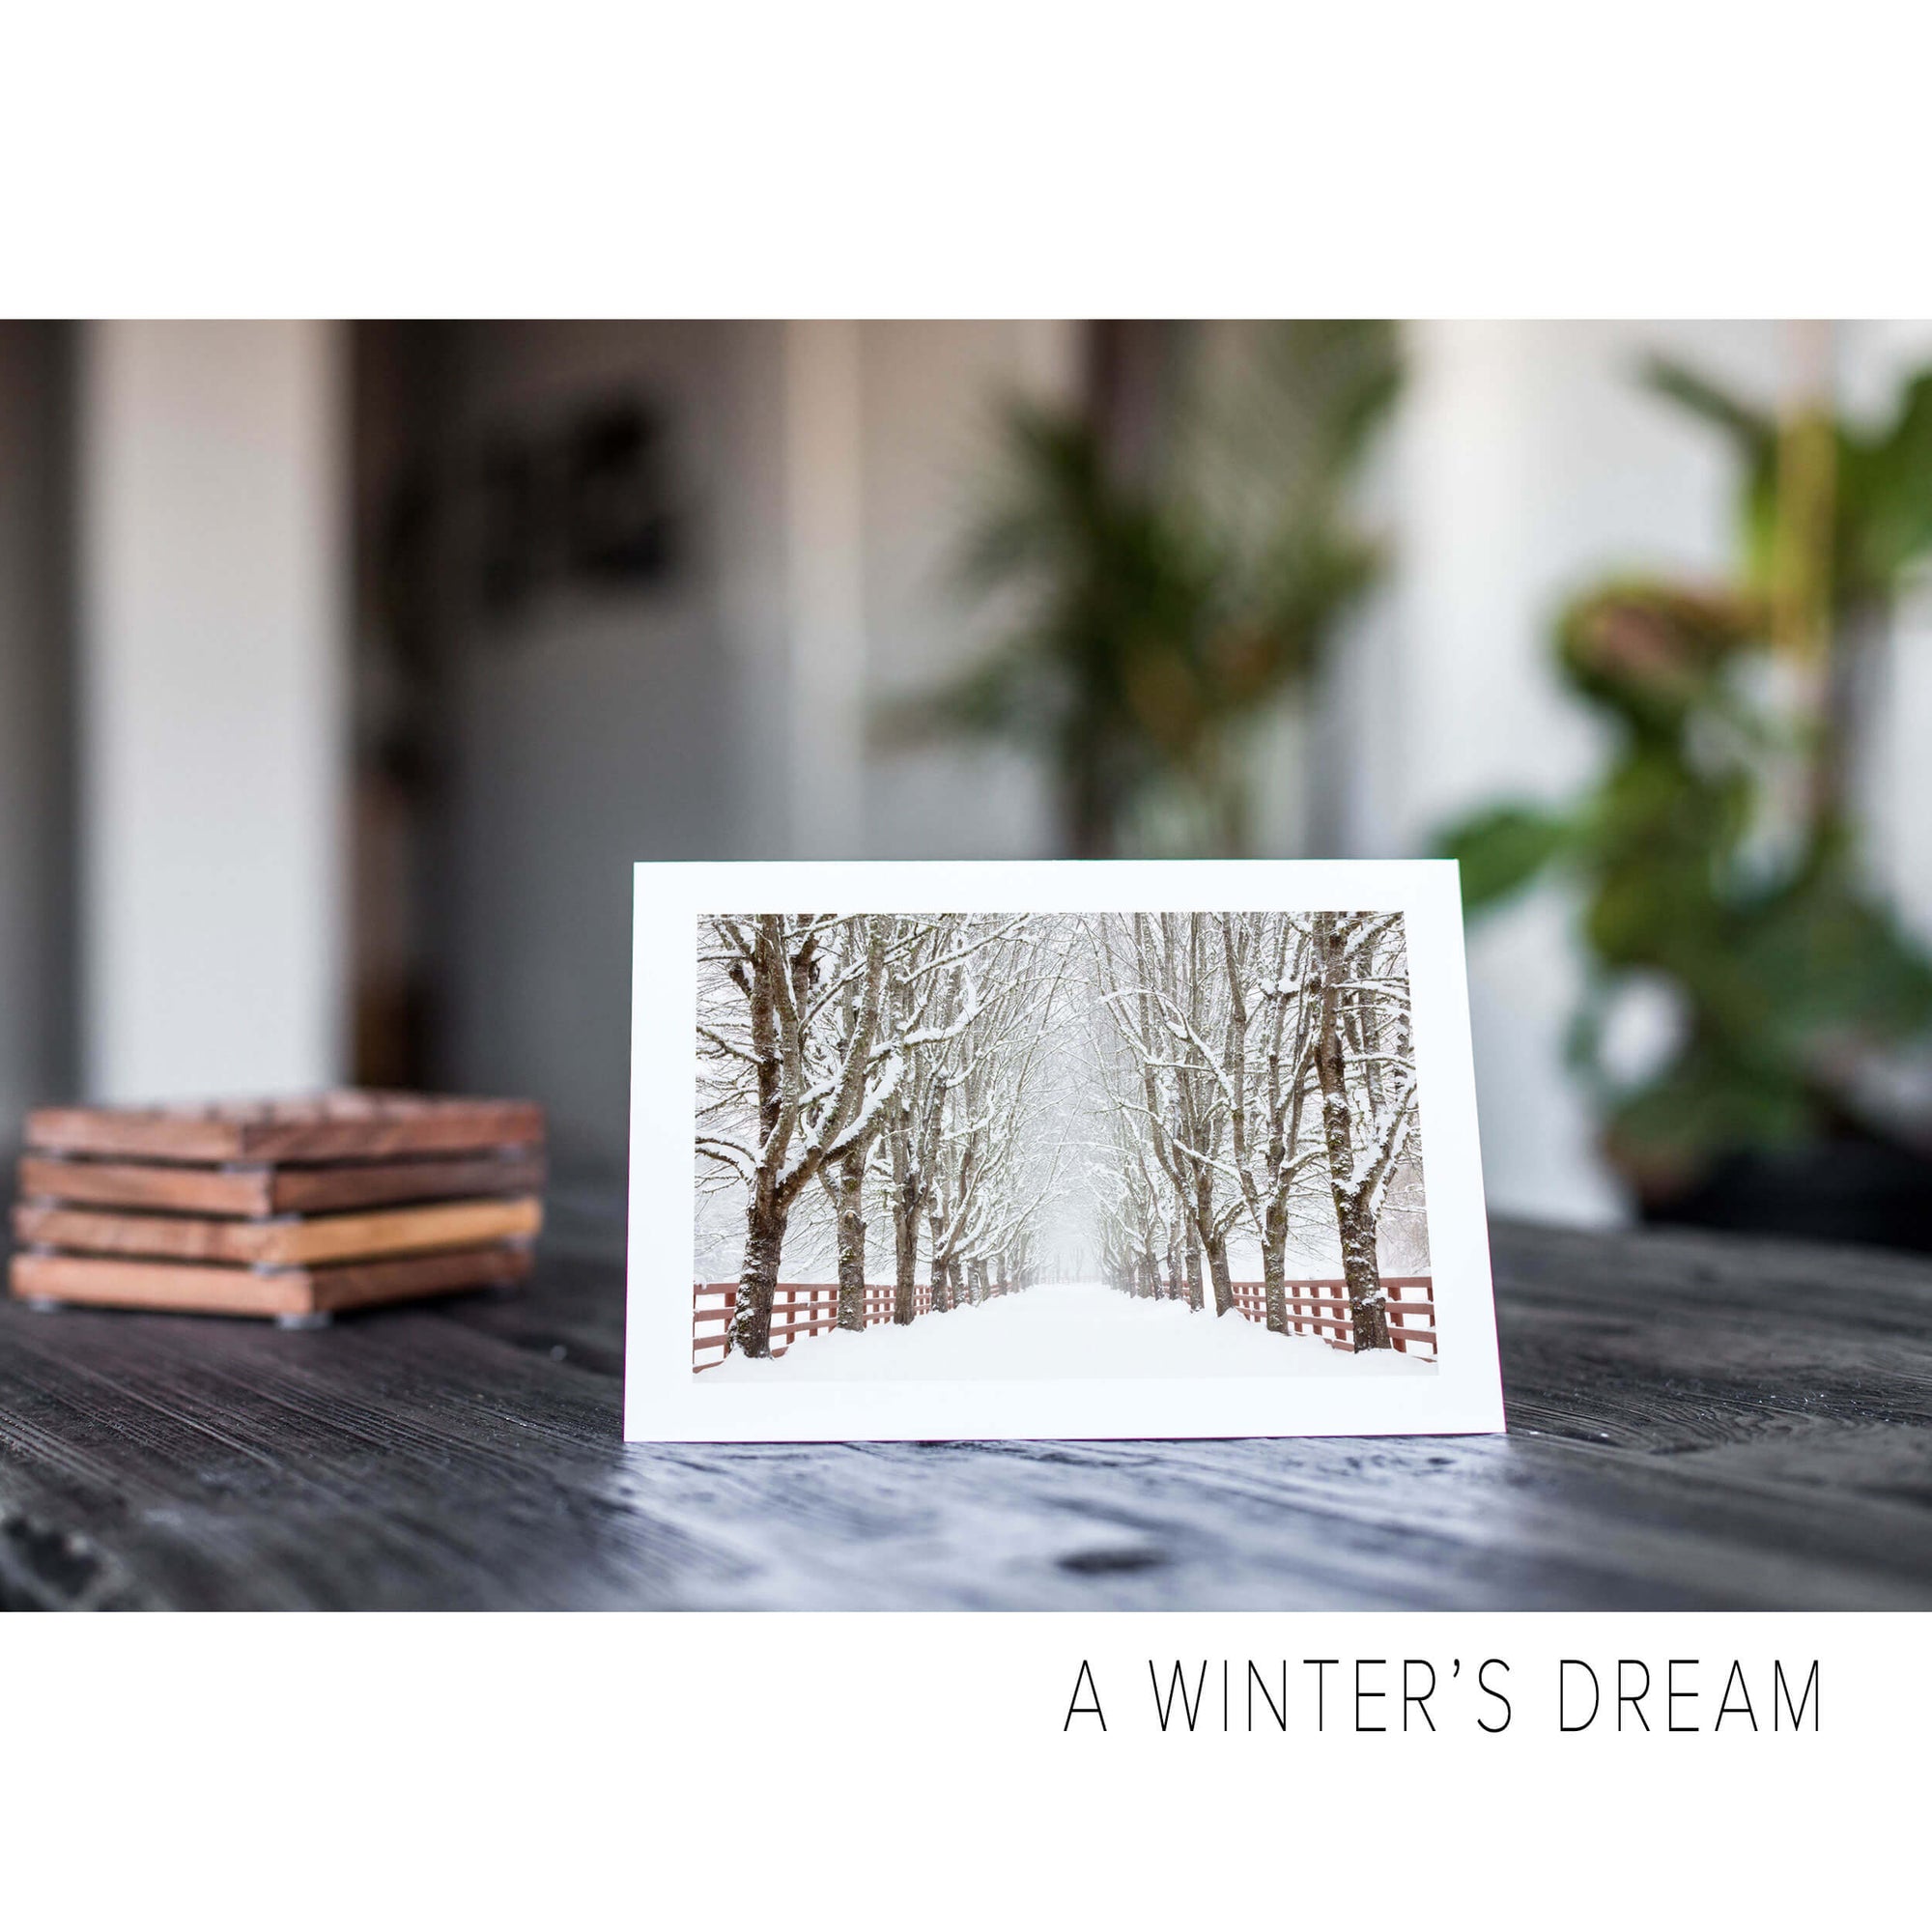 A nature art greeting card shows a picture of Rockwood Farm in Snoqualmie in winter.